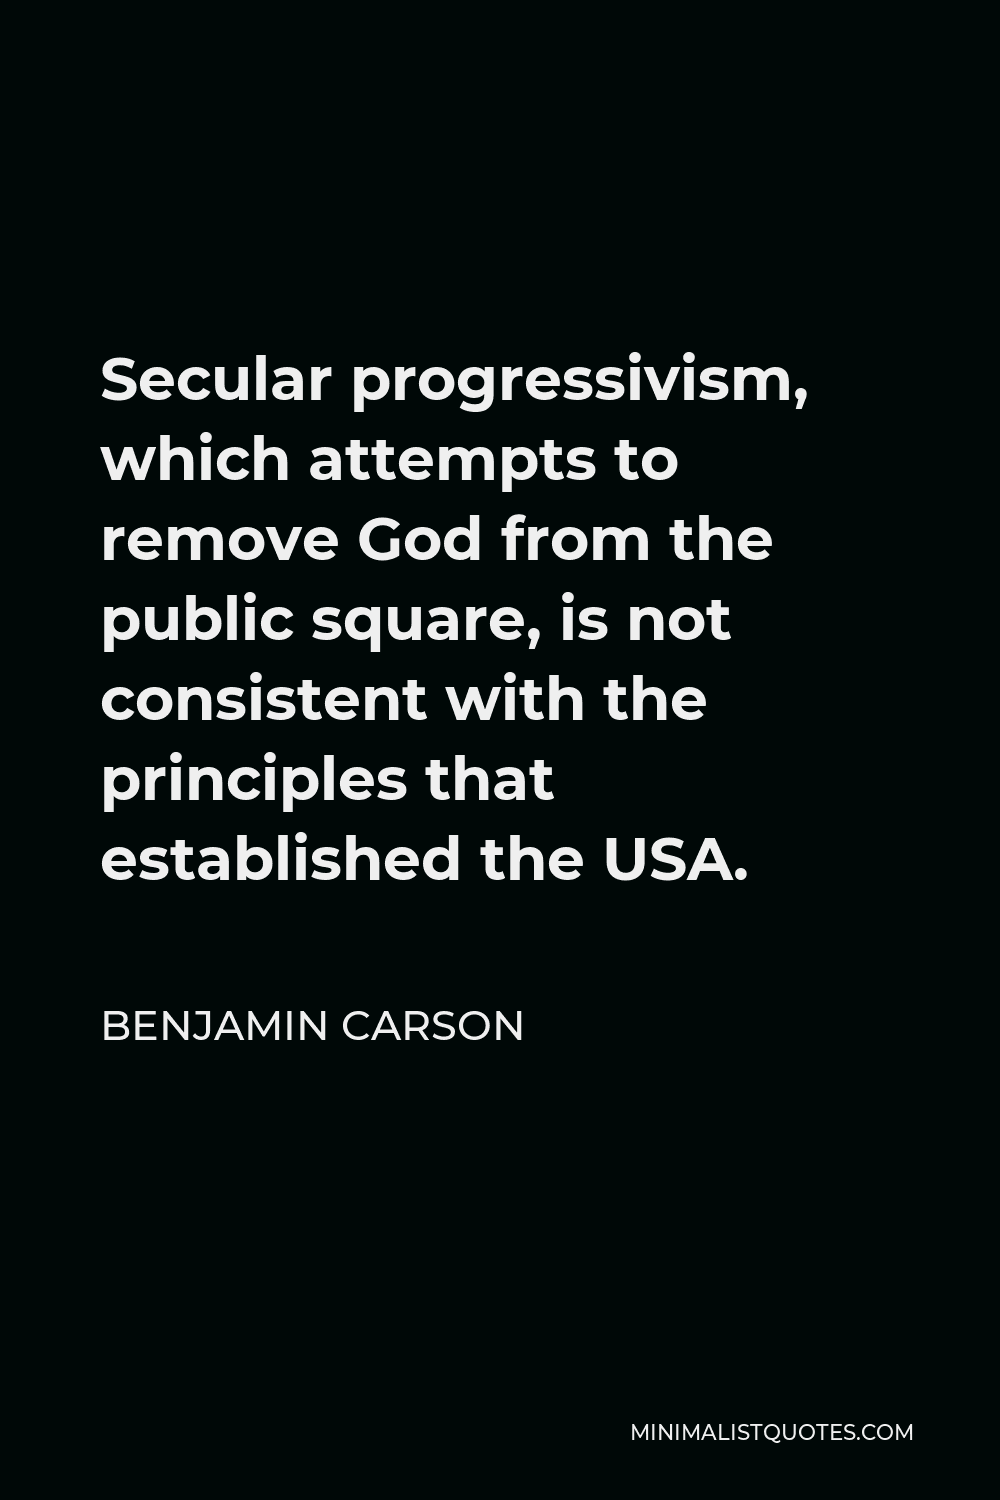 Benjamin Carson Quote - Secular progressivism, which attempts to remove God from the public square, is not consistent with the principles that established the USA.